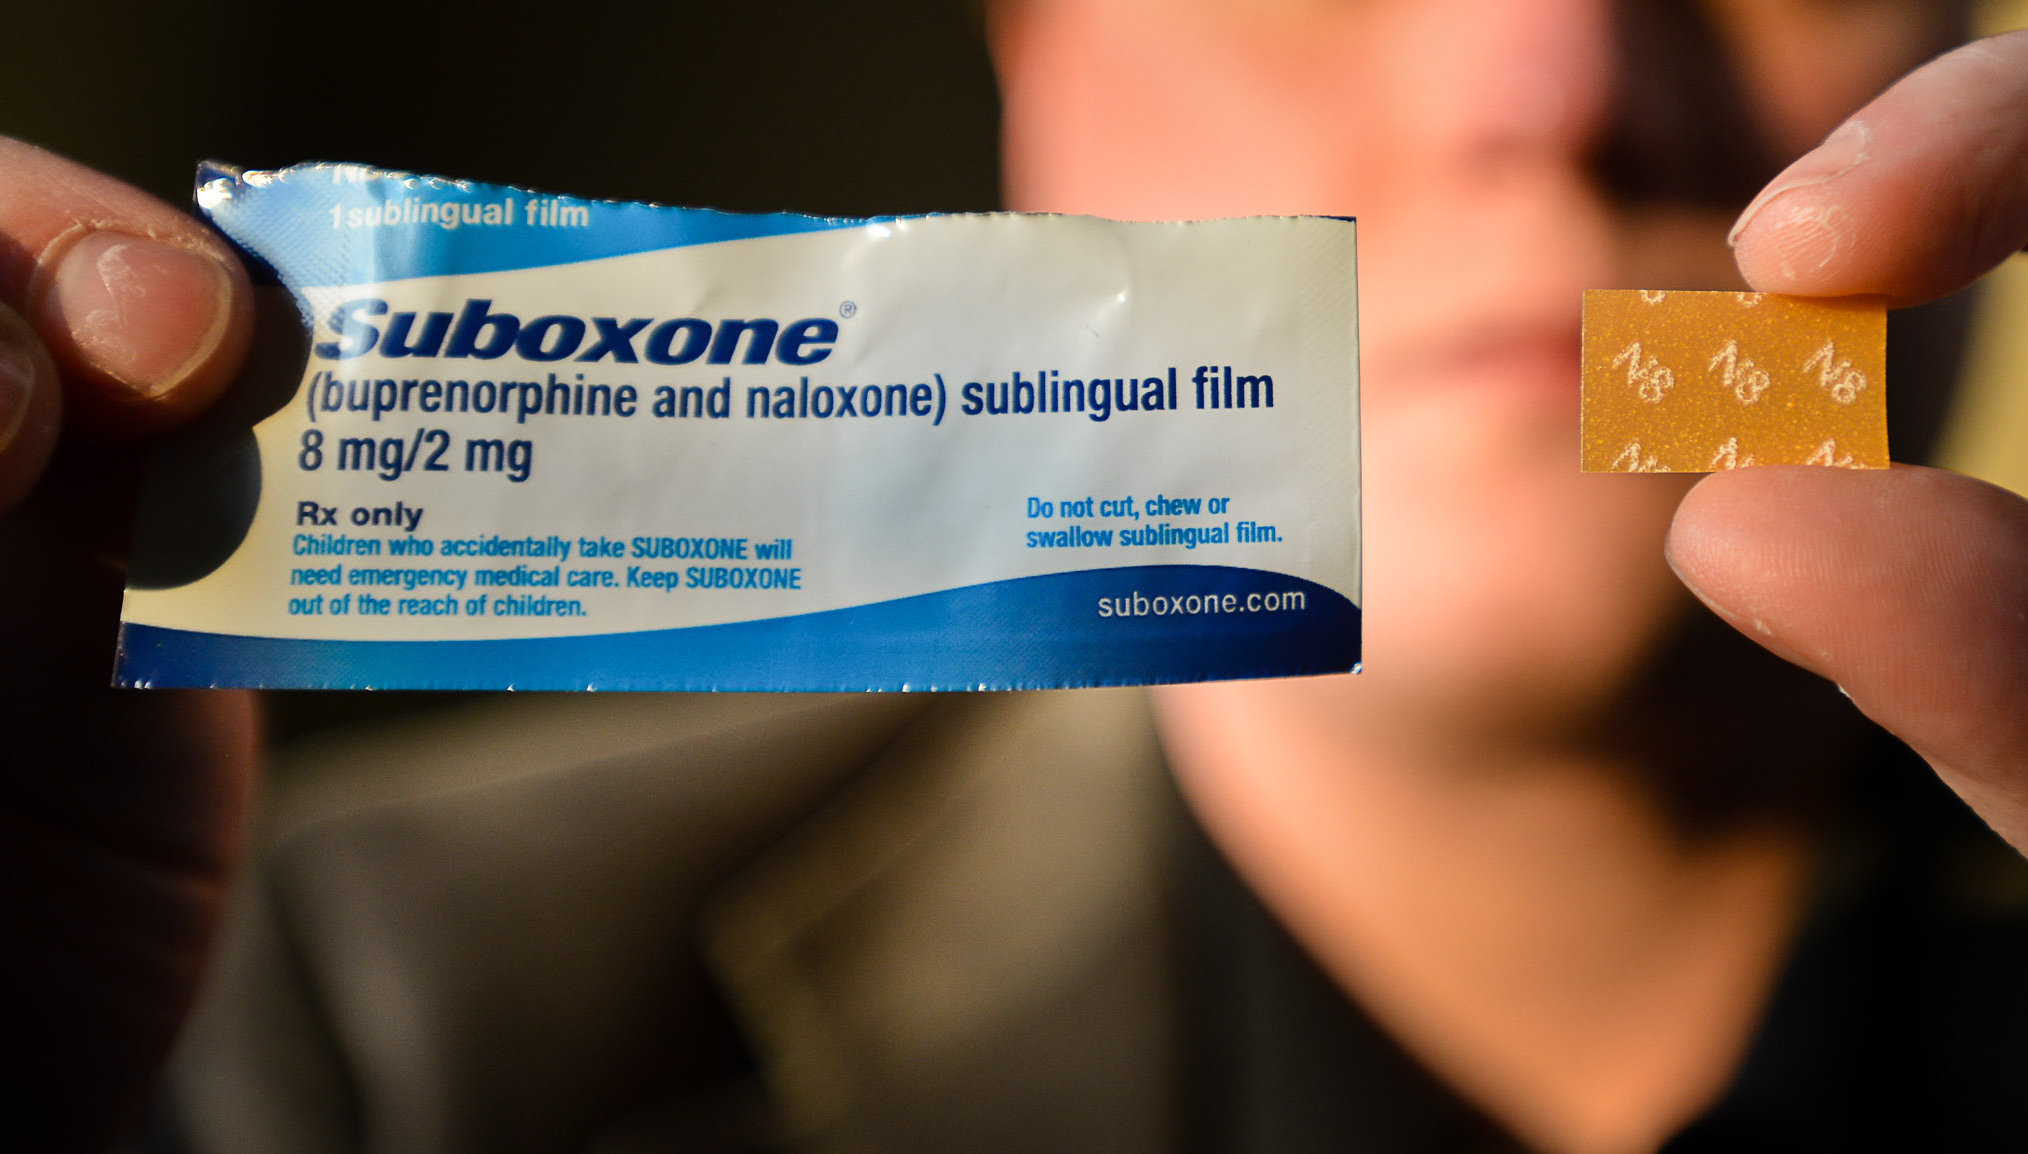 Suboxone abuse signs, side effects, and symptoms.